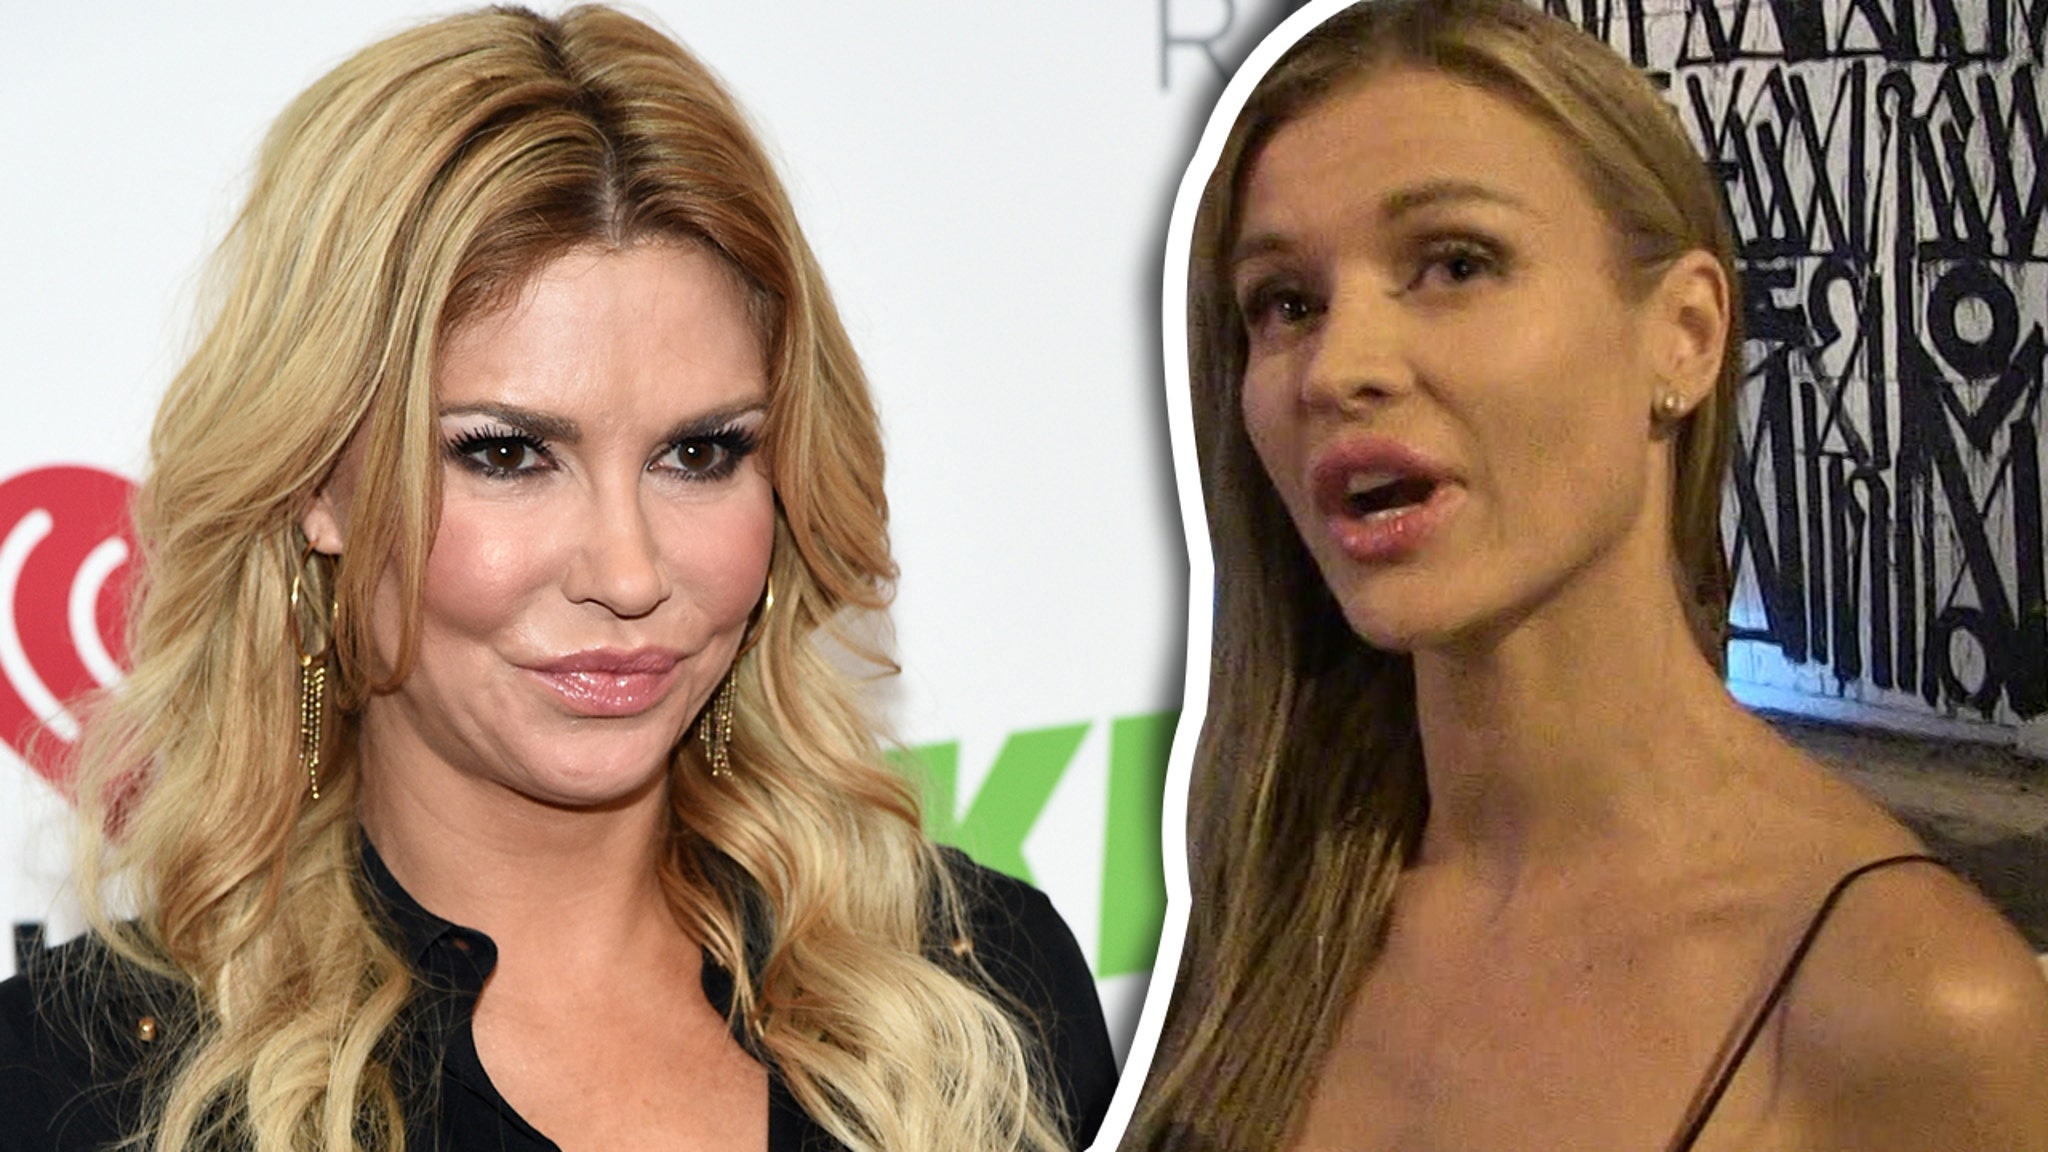 Joanna Krupa is suing Brandi Glanville after Brandy said Joanna had a smell...